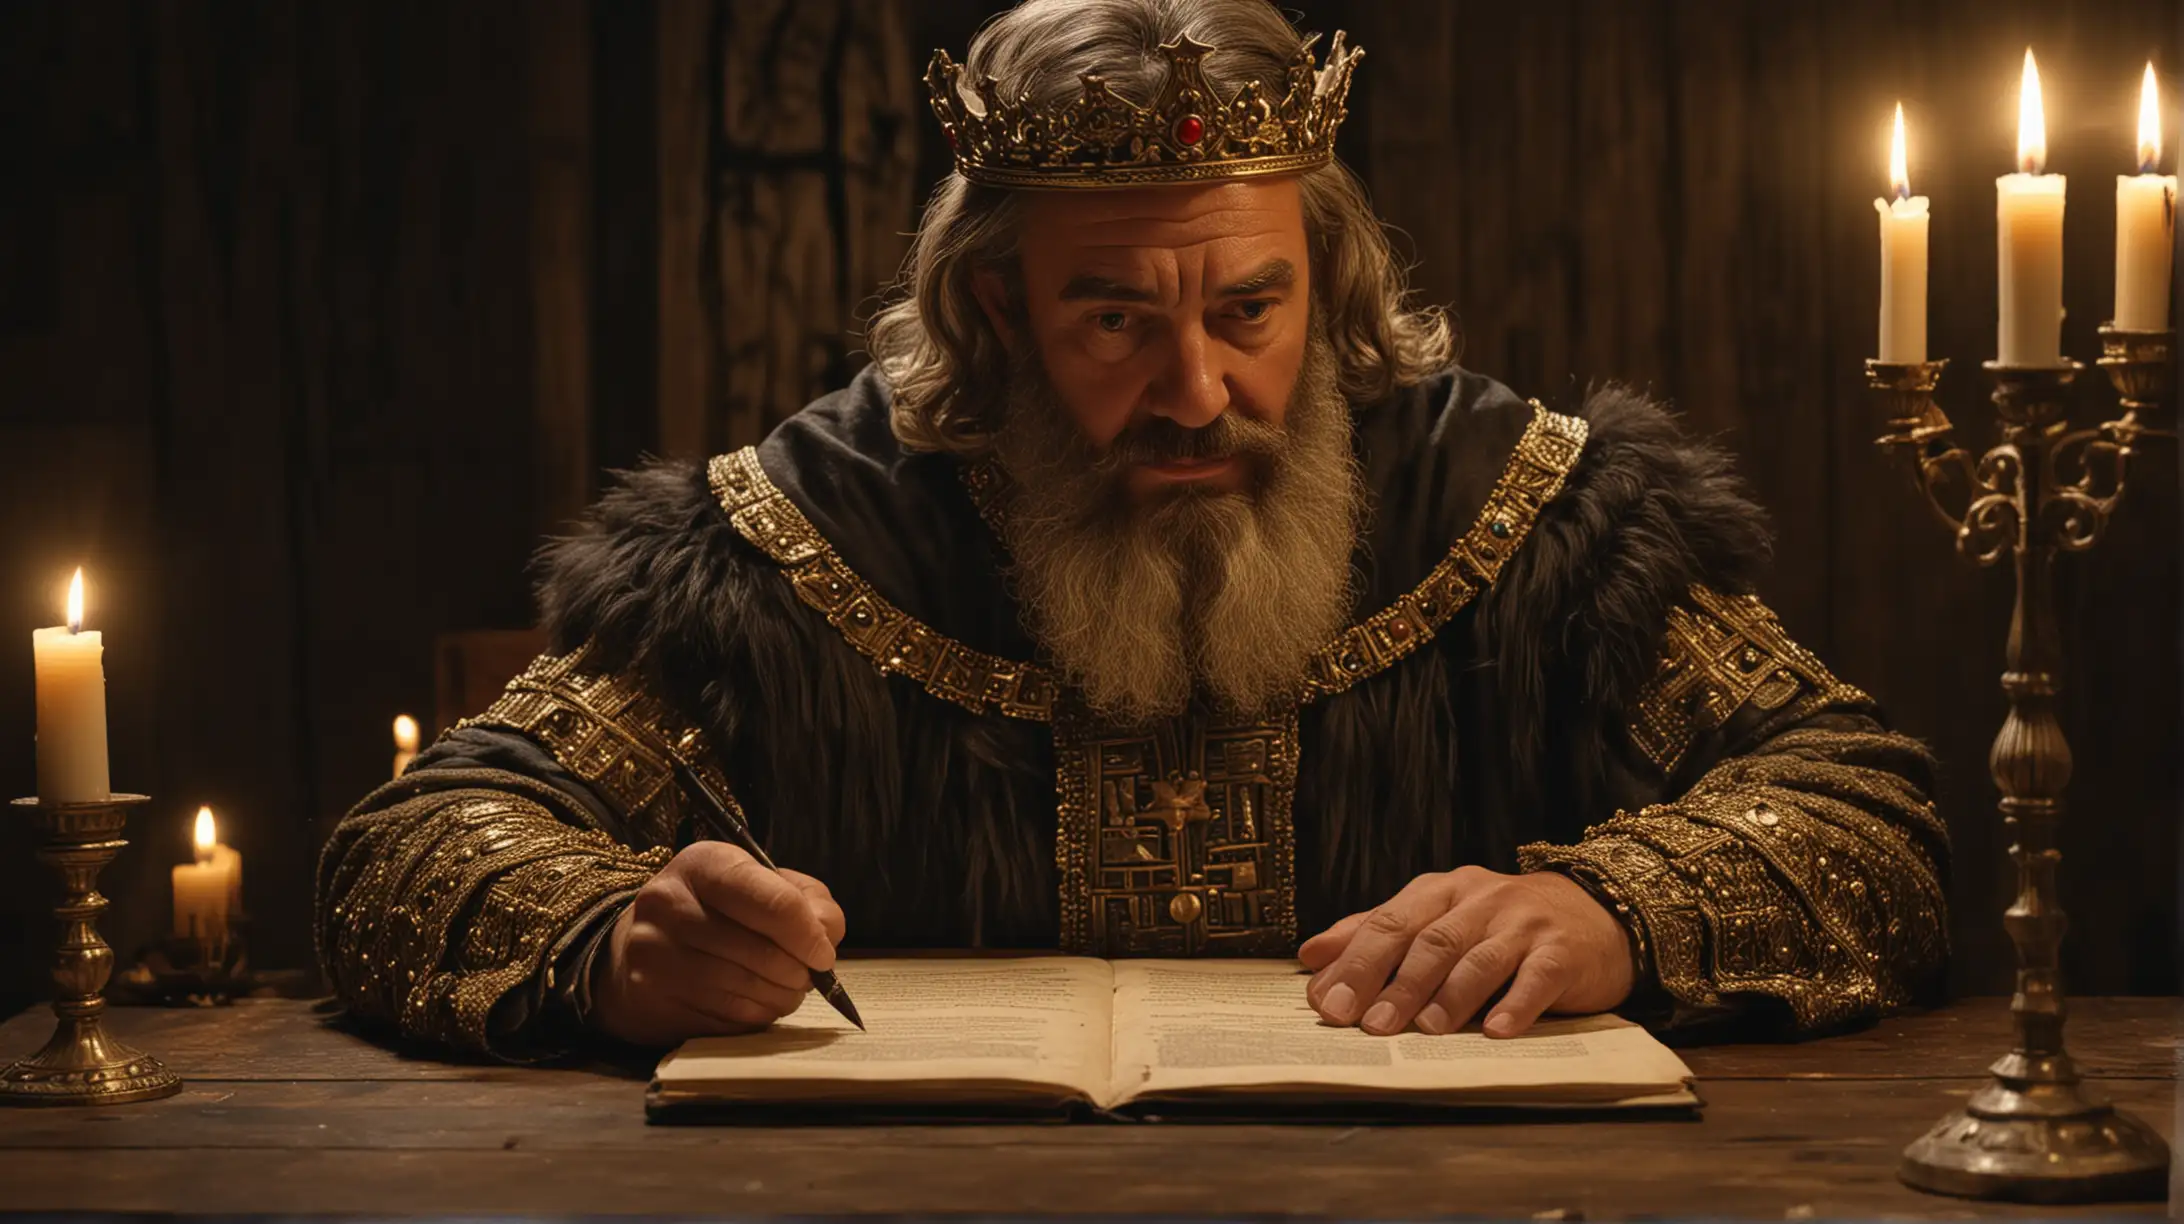 a closeup of a middle aged  King Artaxerxes from the Bible, Sitting at a wooden table by candlelight, writing on a letter.